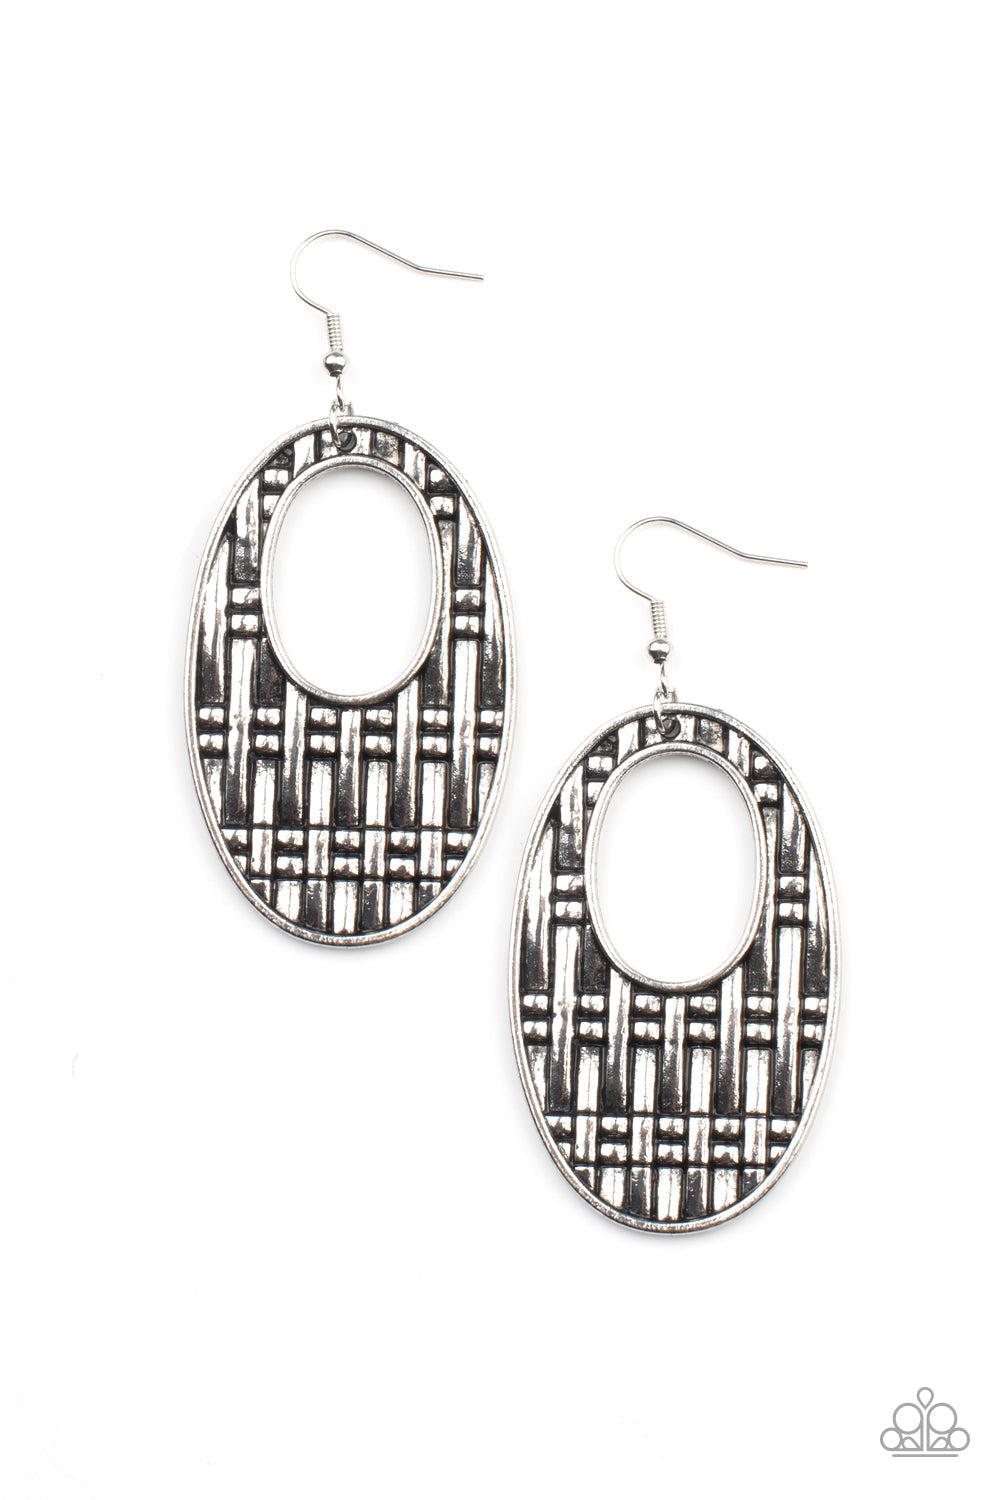 Engraved Edge Silver Earrings - Paparazzi Accessories- lightbox - CarasShop.com - $5 Jewelry by Cara Jewels